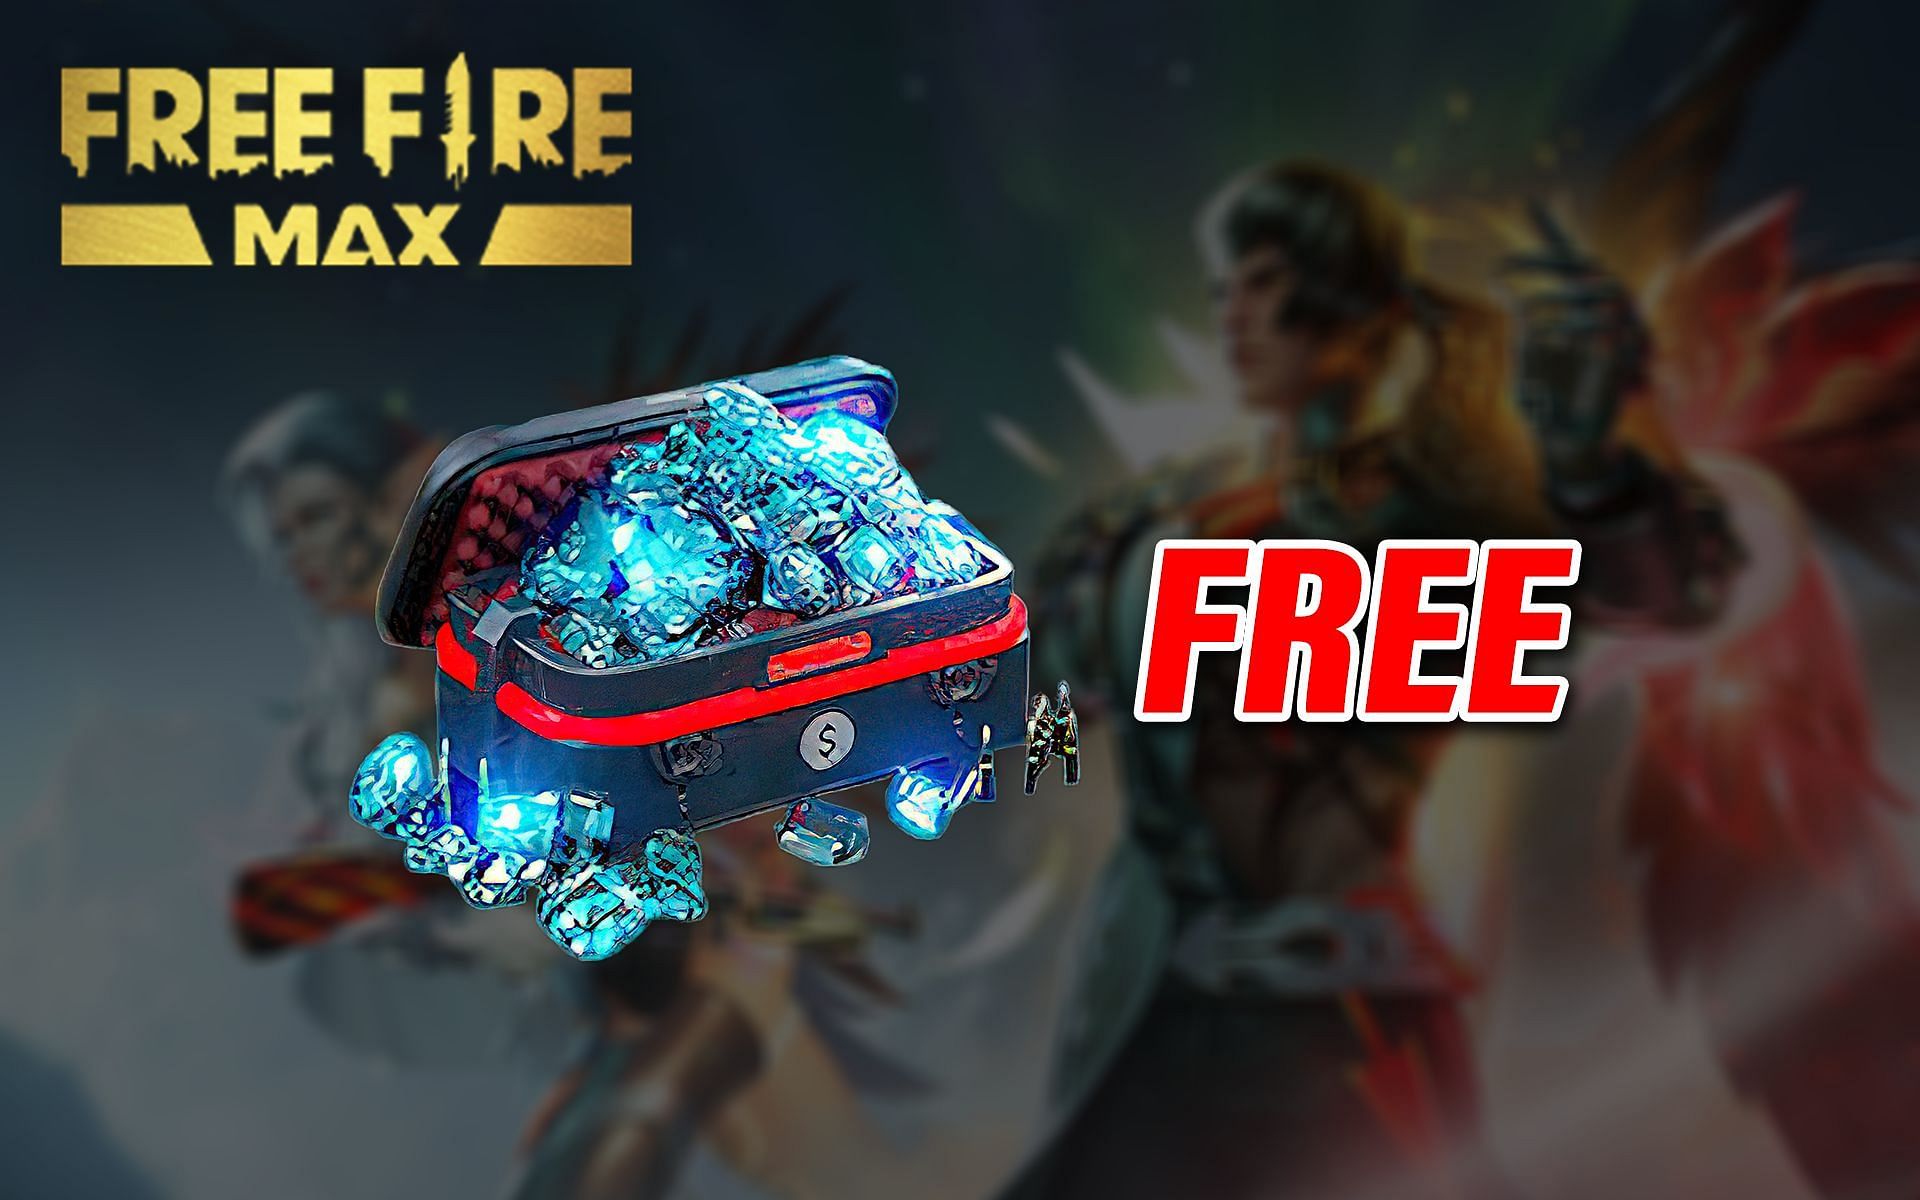 Redeem codes can offer a wide range of free rewards like diamonds, skins, and more (Image via Garena)